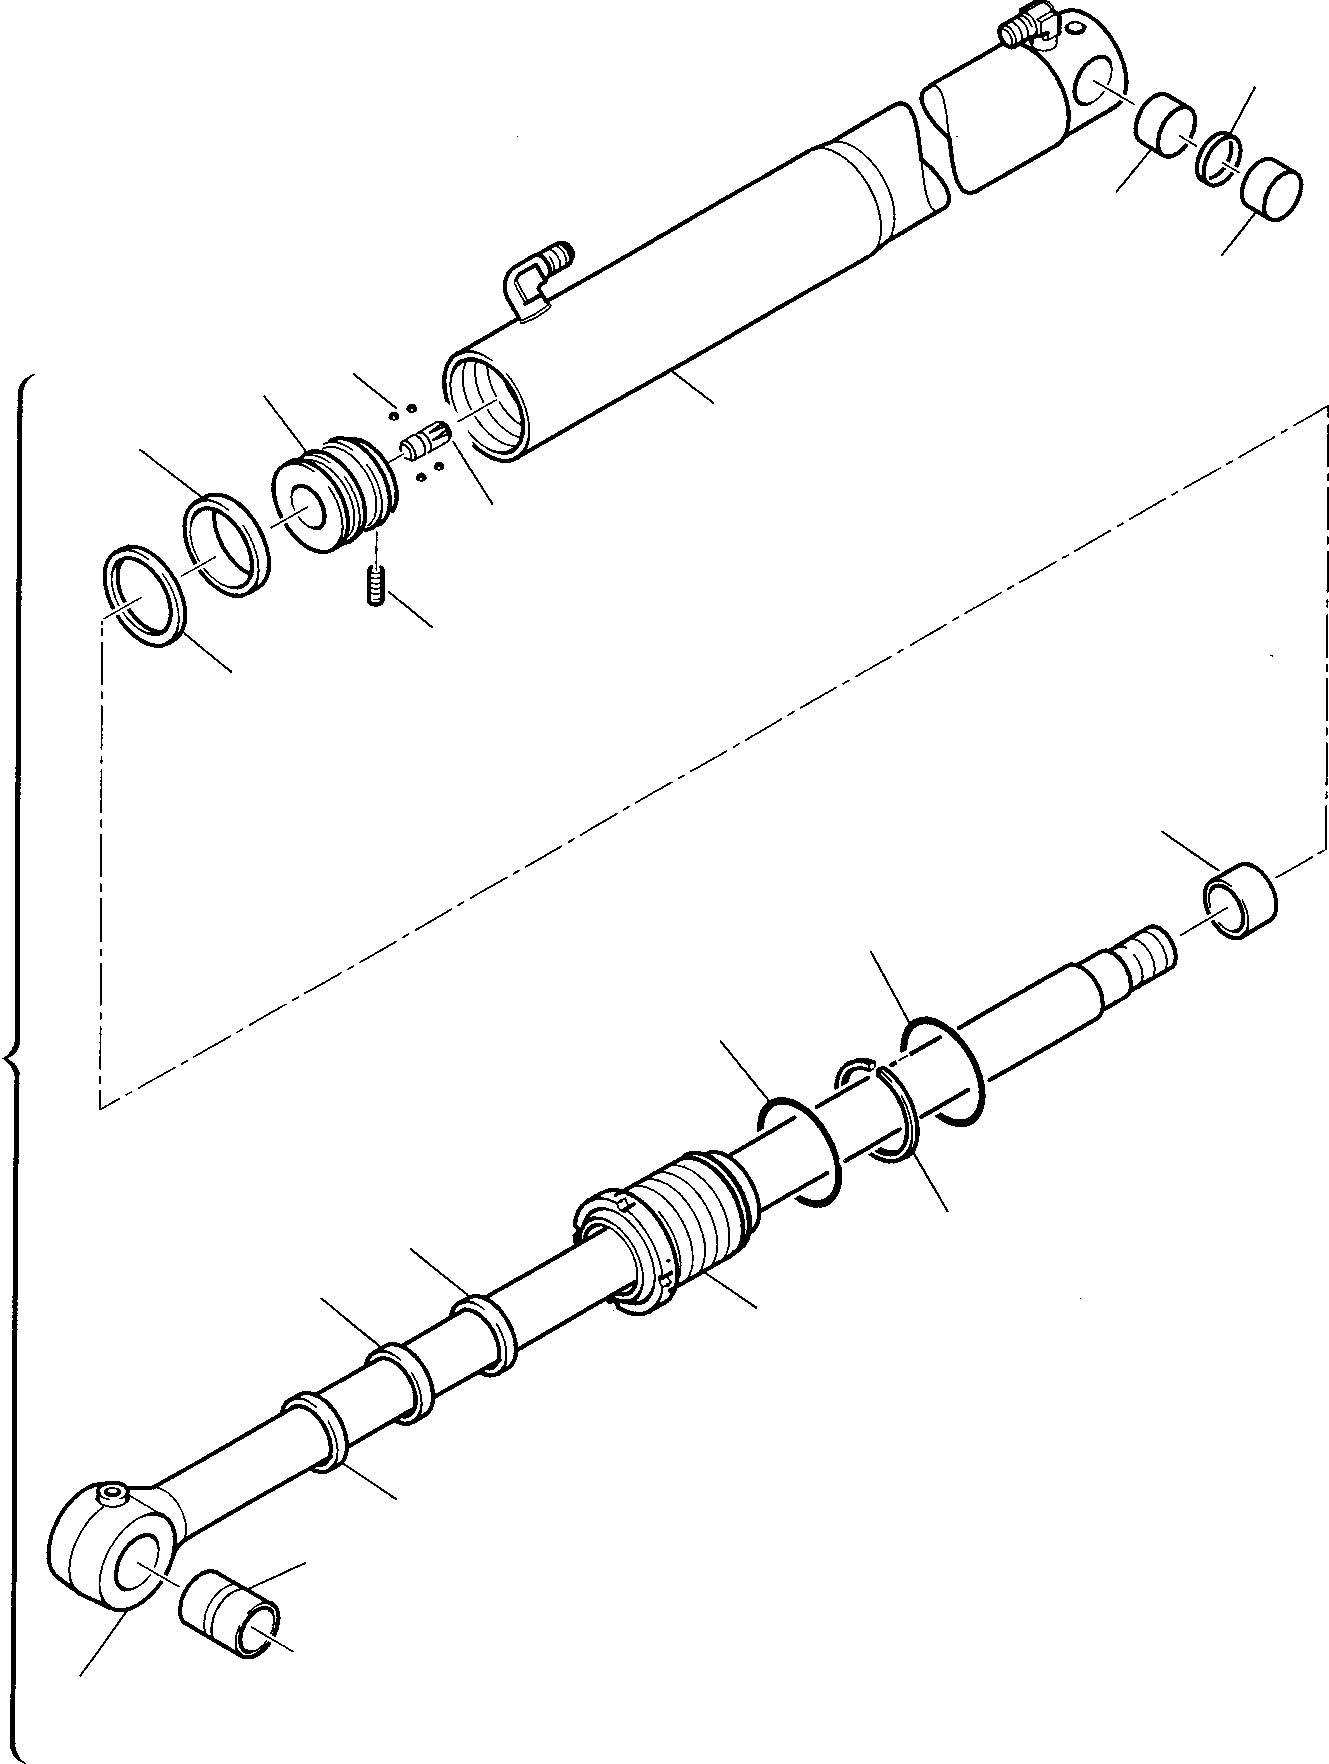 Part 55. HORIZONTAL OUTRIGGER CYLINDER R.H. [6790]